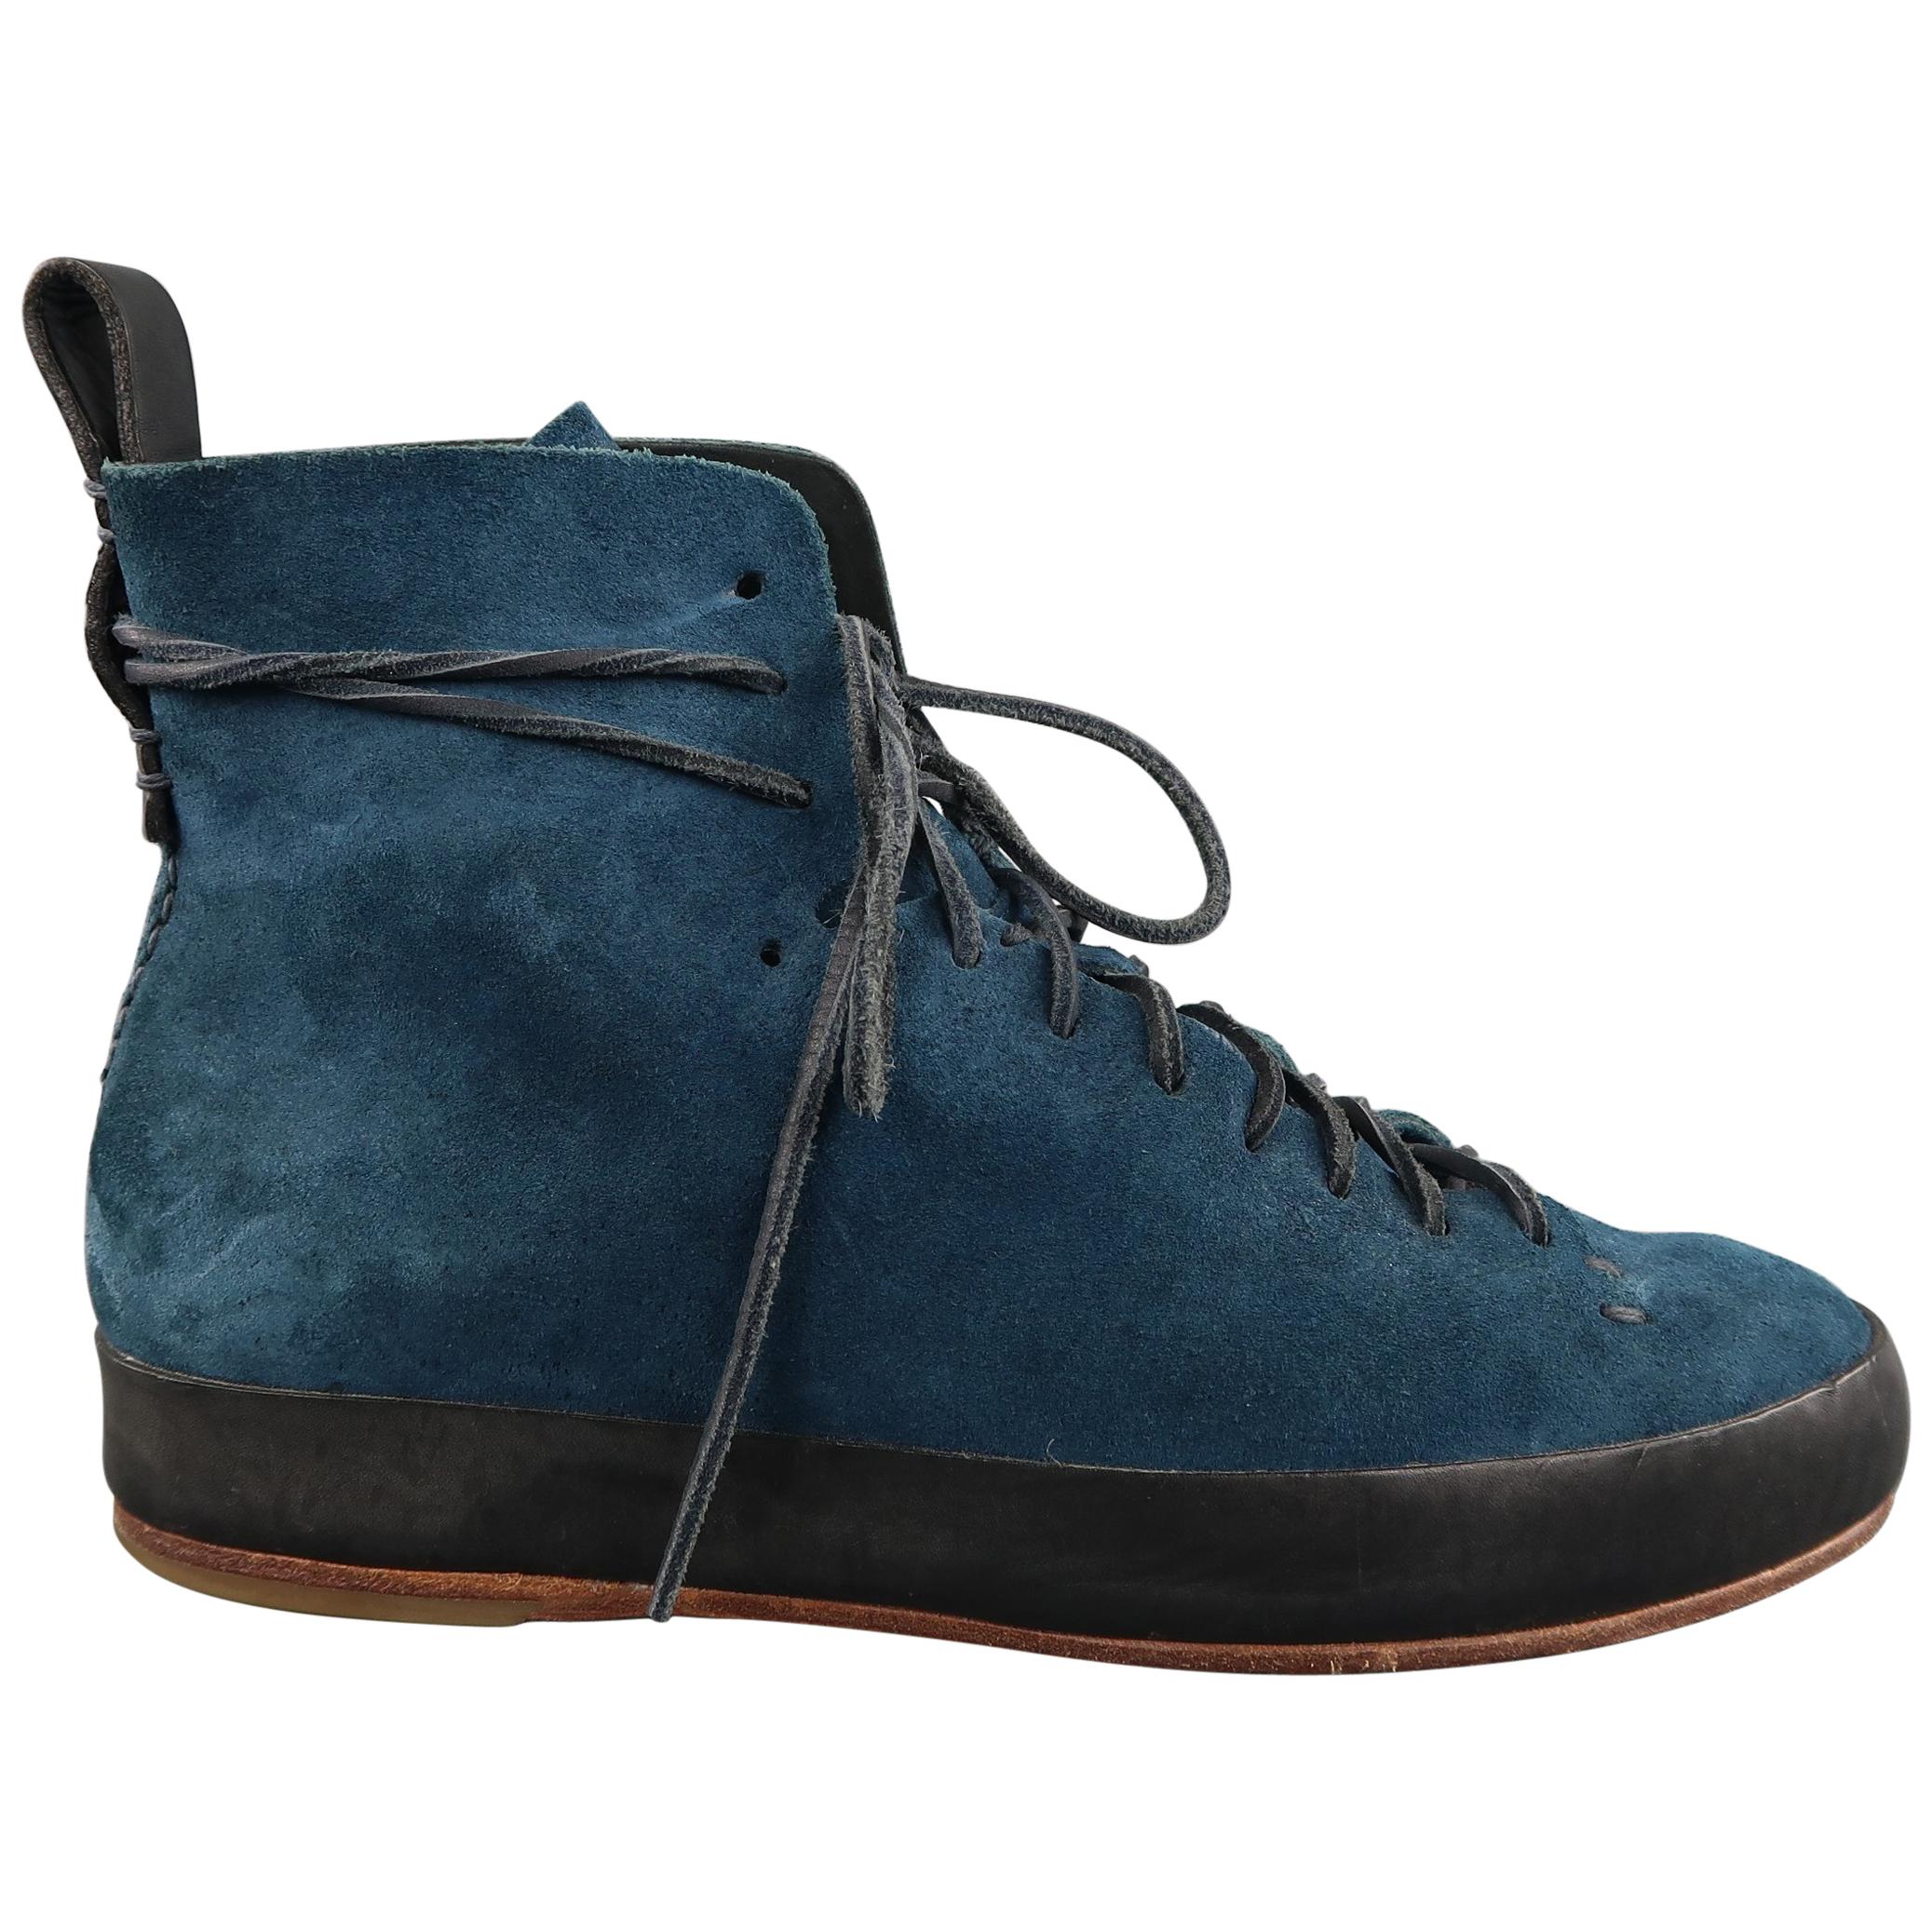 FEIT Size 10 Blue Solid Suede Ankle Boots